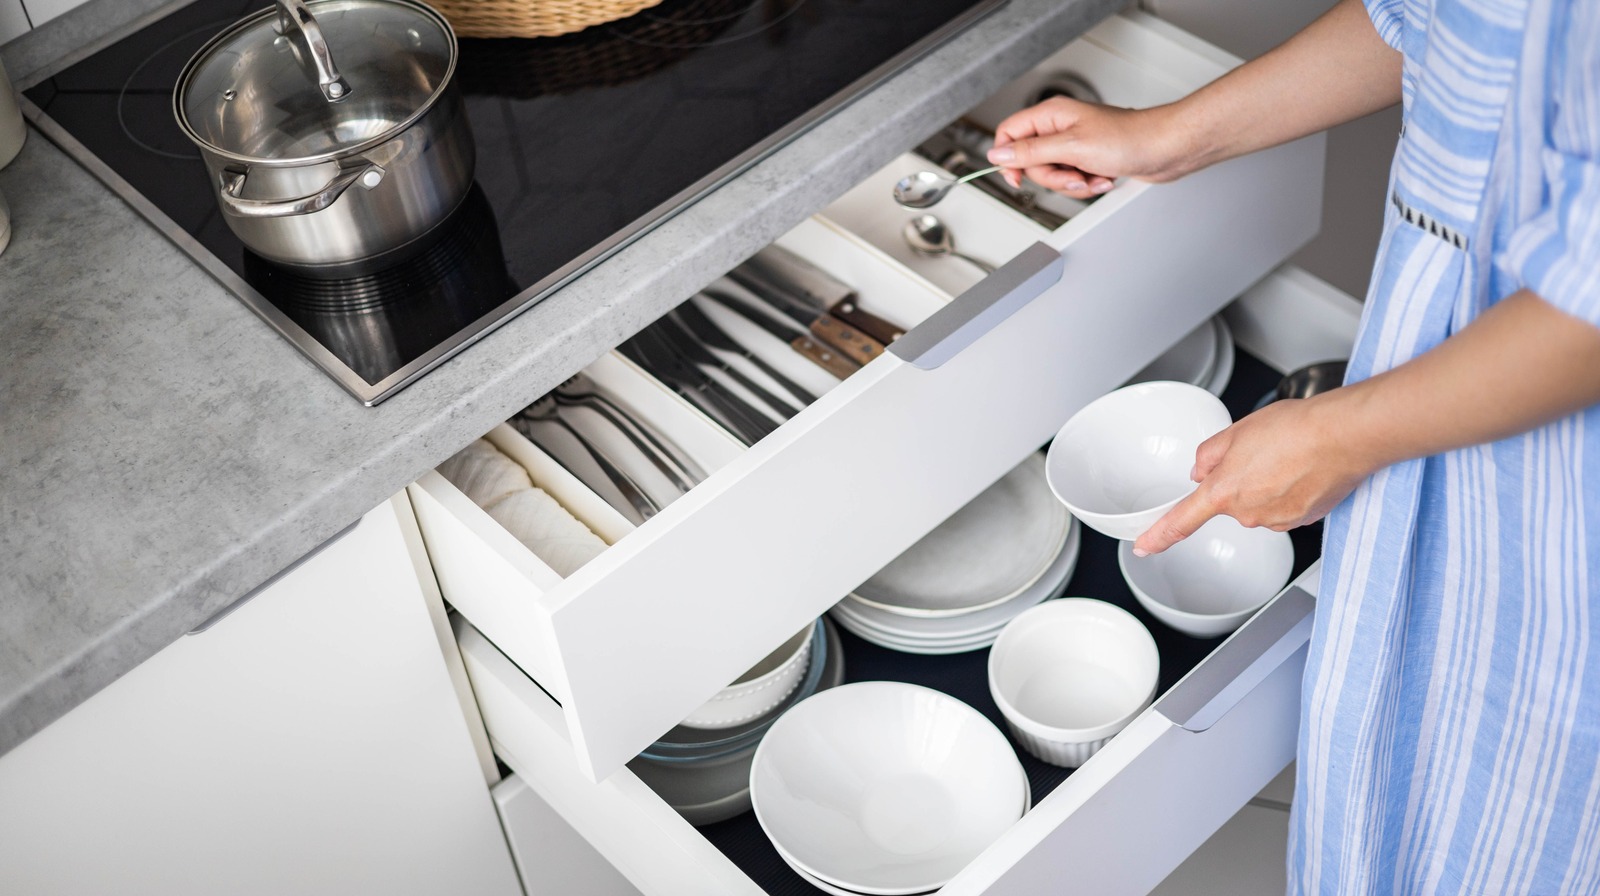 Kitchen Dish Drawer Systems Guide - Why Store Plates in Drawers